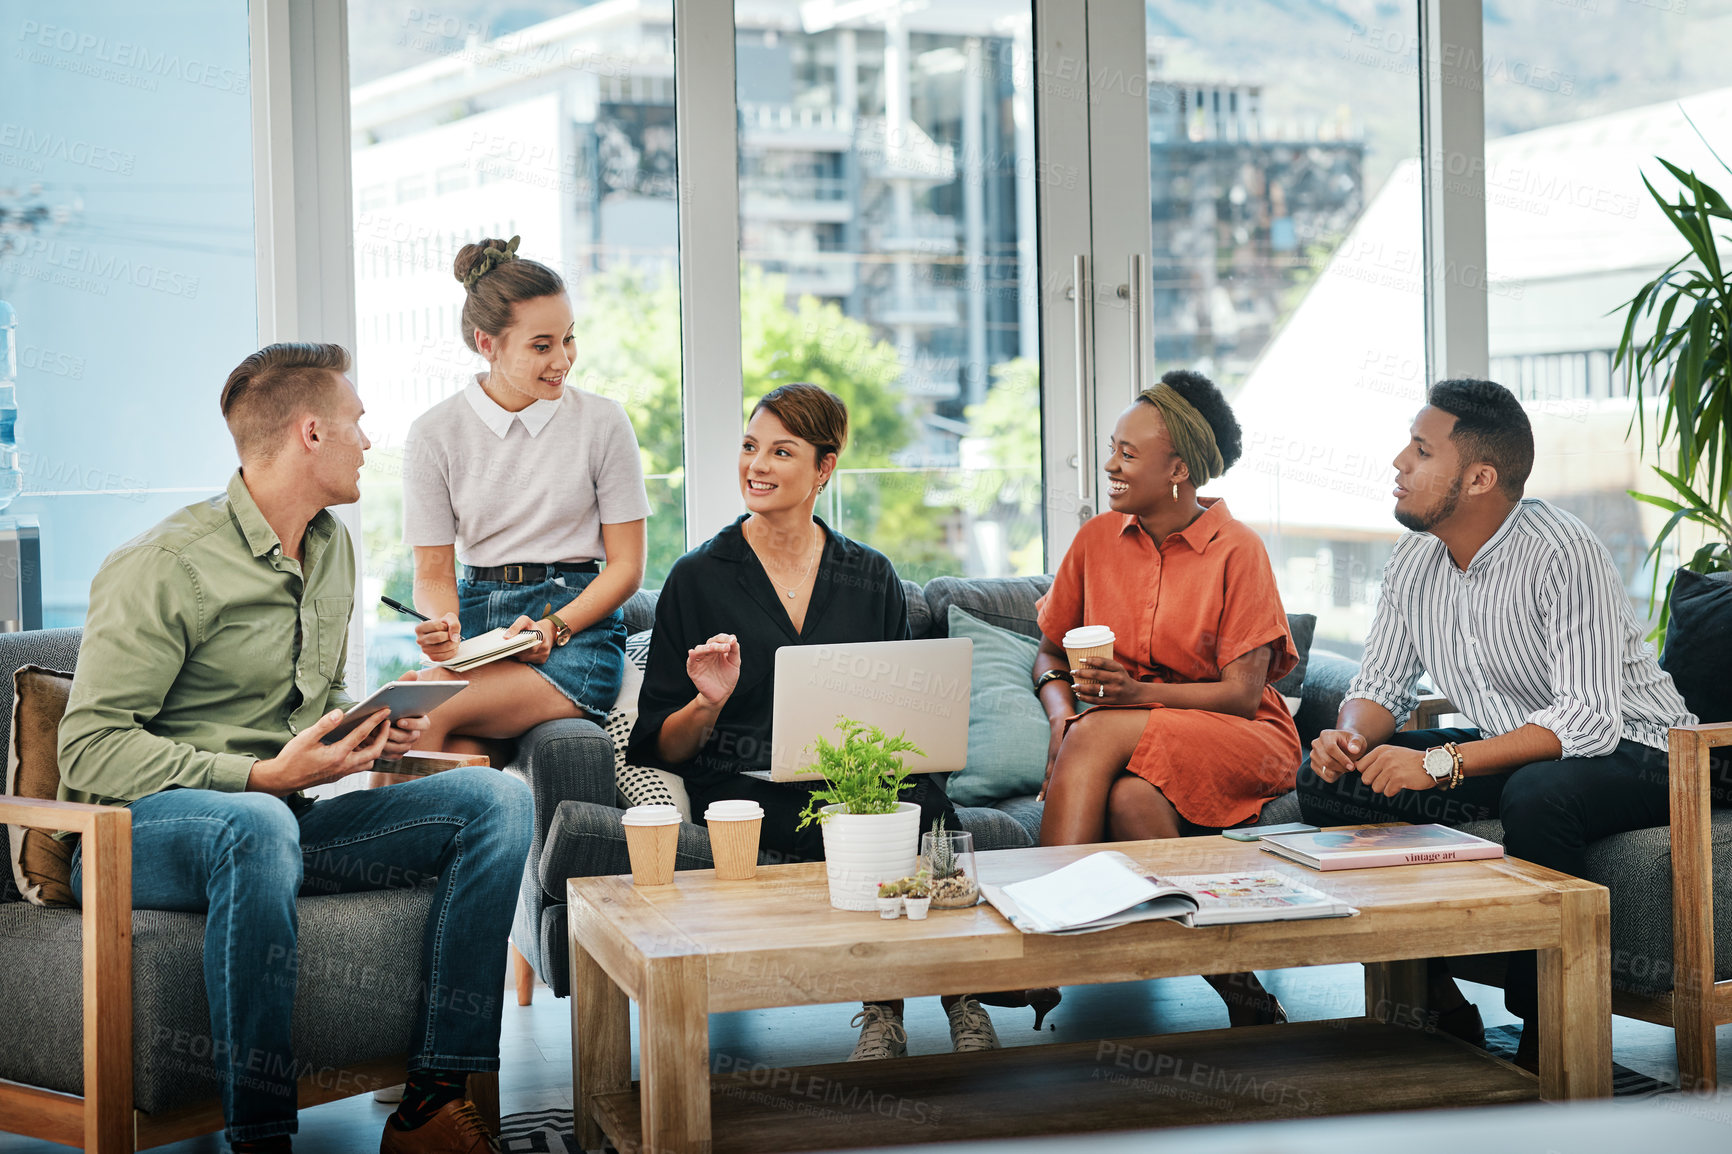 Buy stock photo Cropped shot of a diverse group of businesspeople sitting in the office together and having a meeting